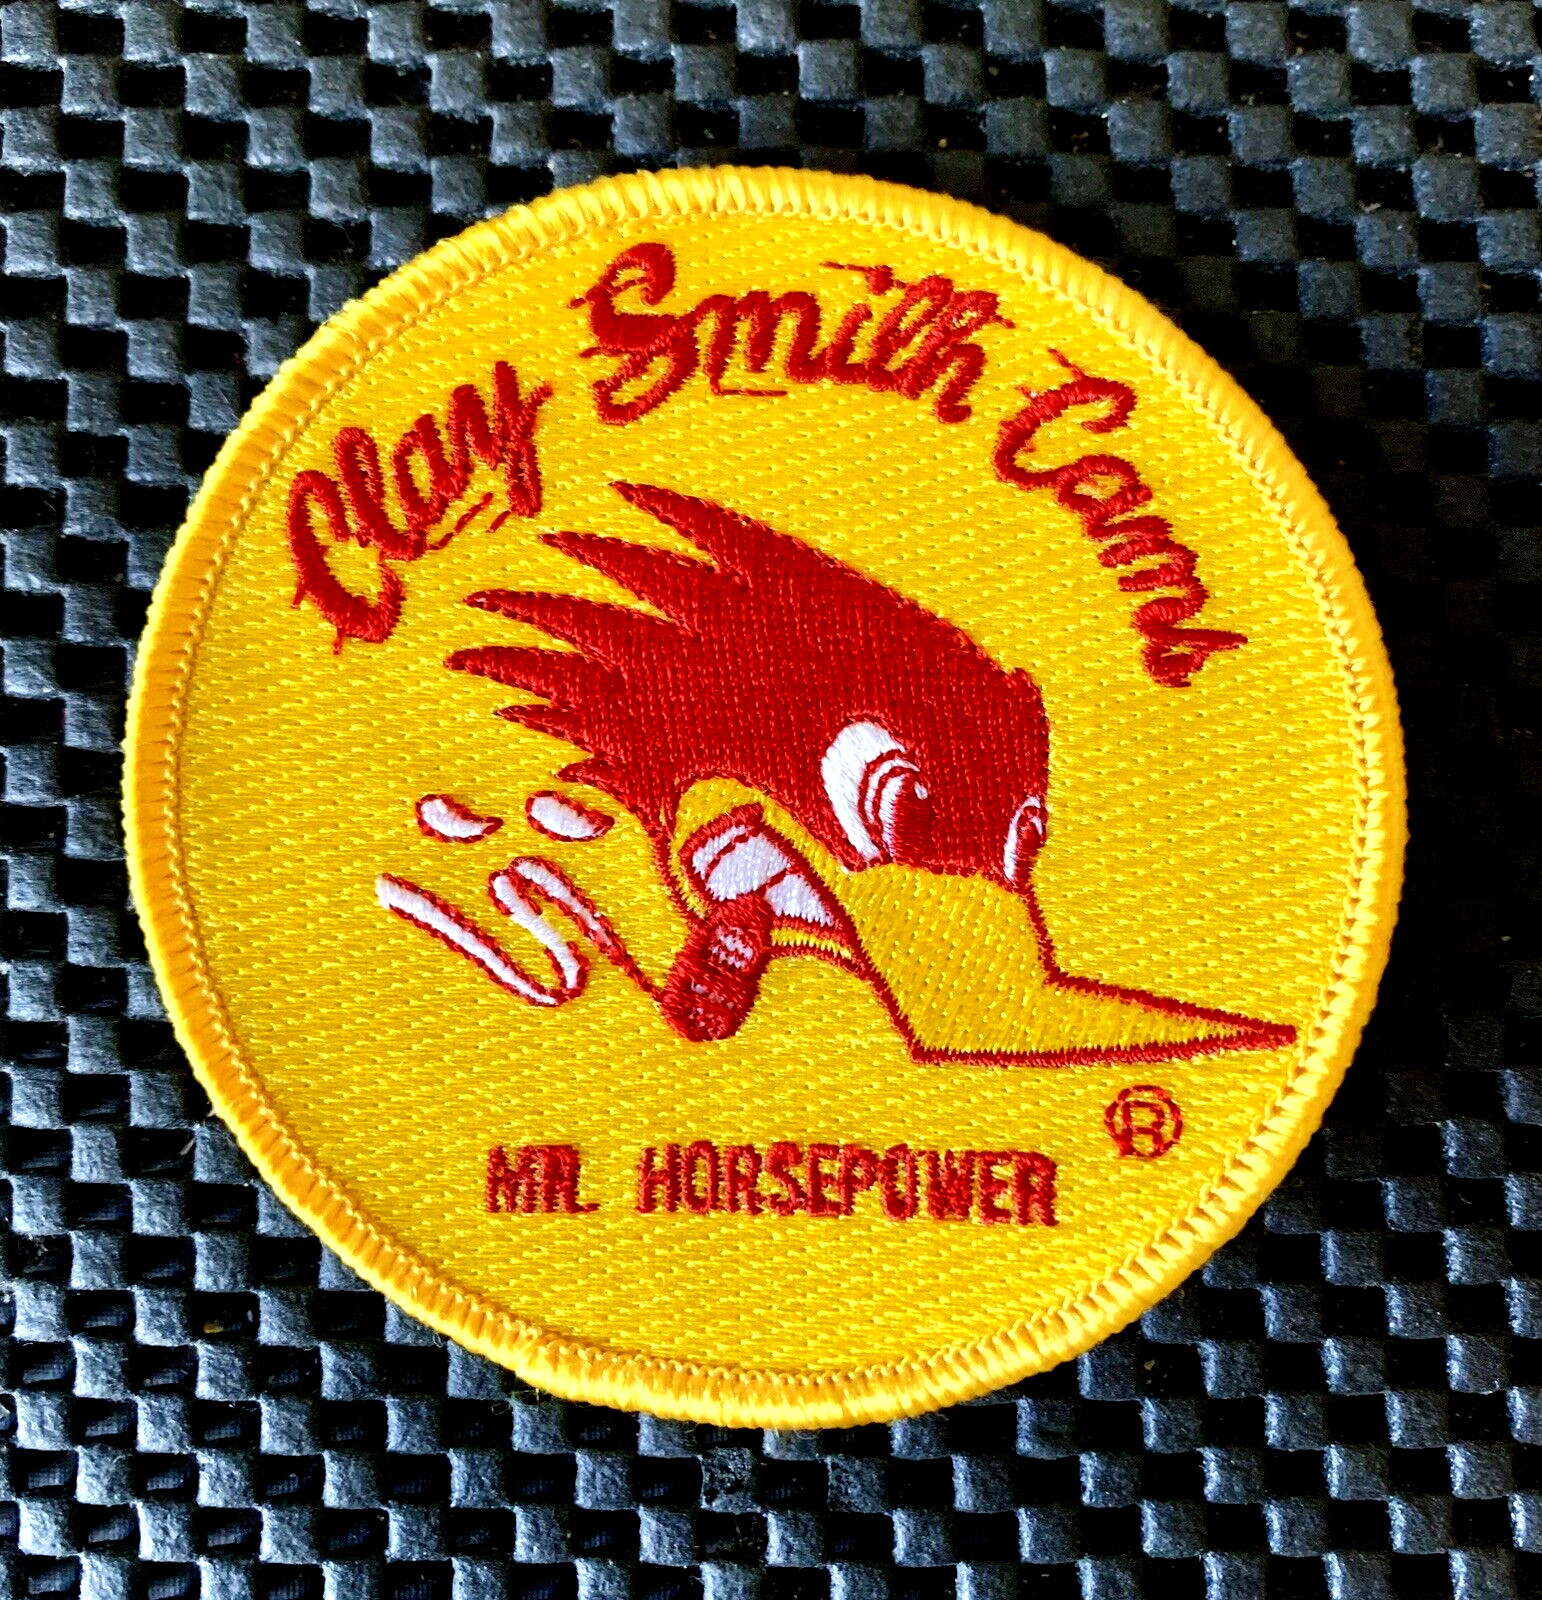 CLAY SMITH CAMS MR. HORSEPOWER EMBROIDERED SEW ON ONLY PATCH CAMSHAFTS 3 1/2 NOS